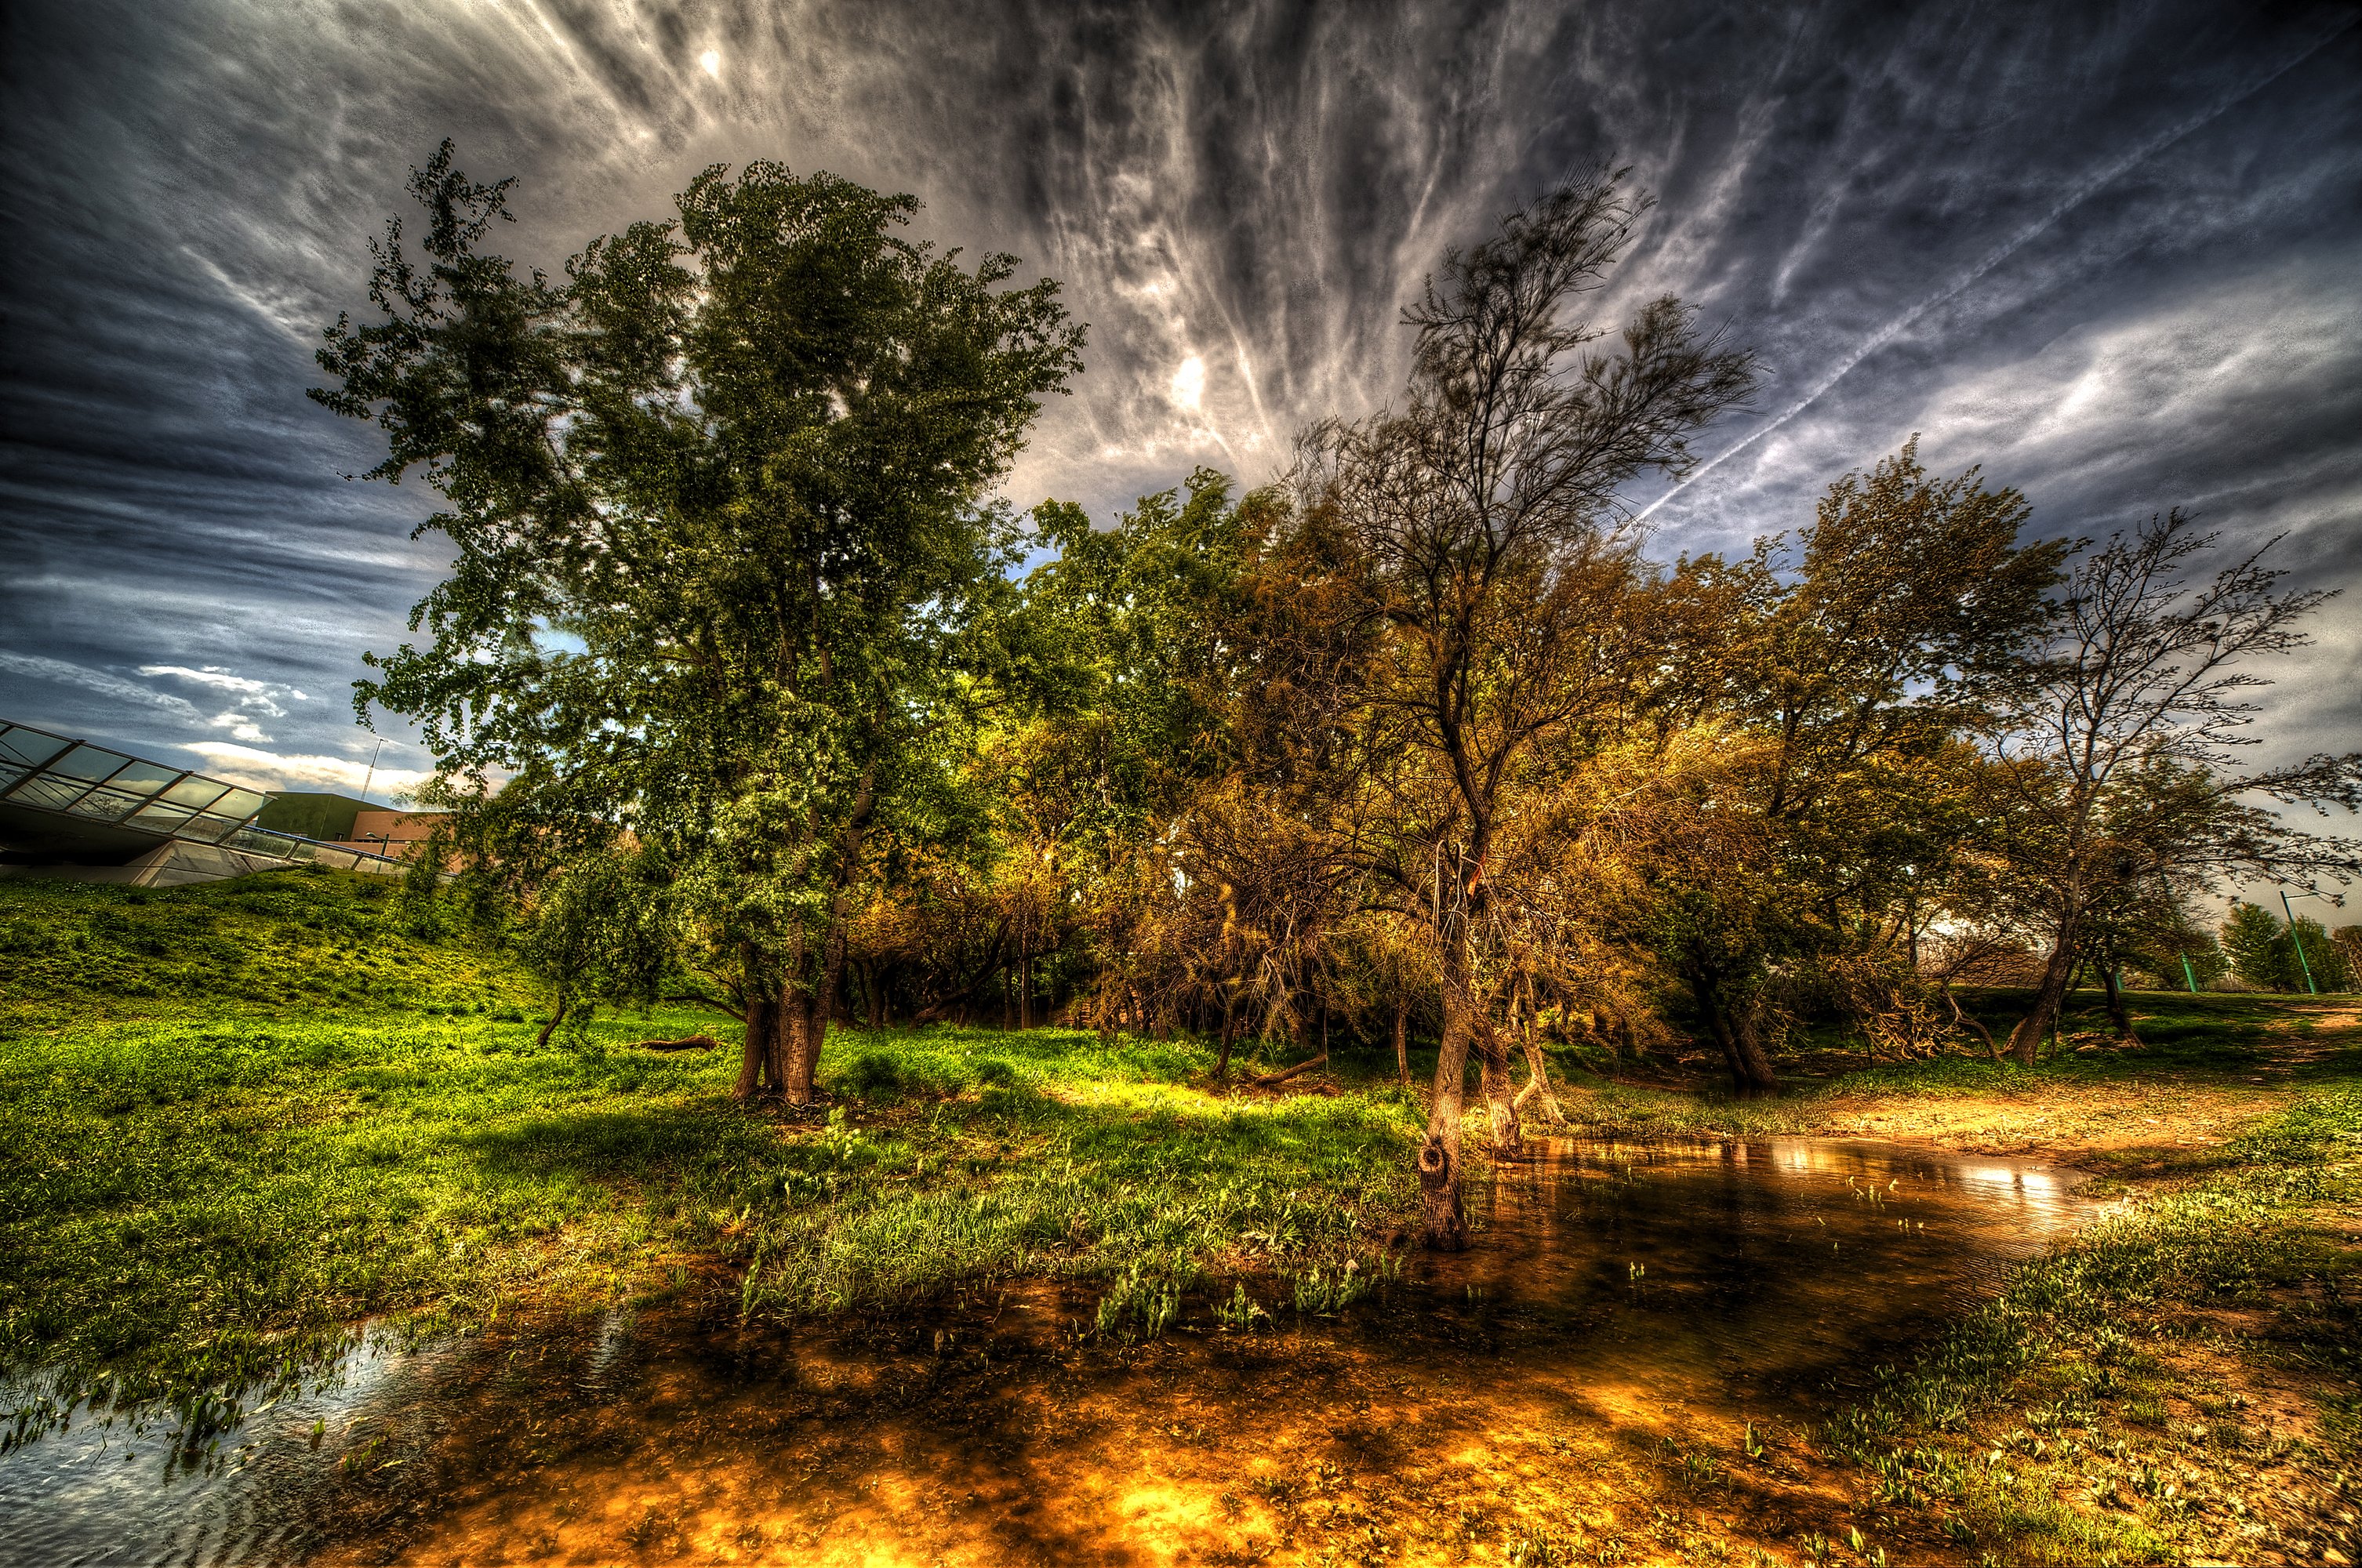 spain, Water, Hdr, Trees, Grass, Clouds, Zaragoza, Nature Wallpaper